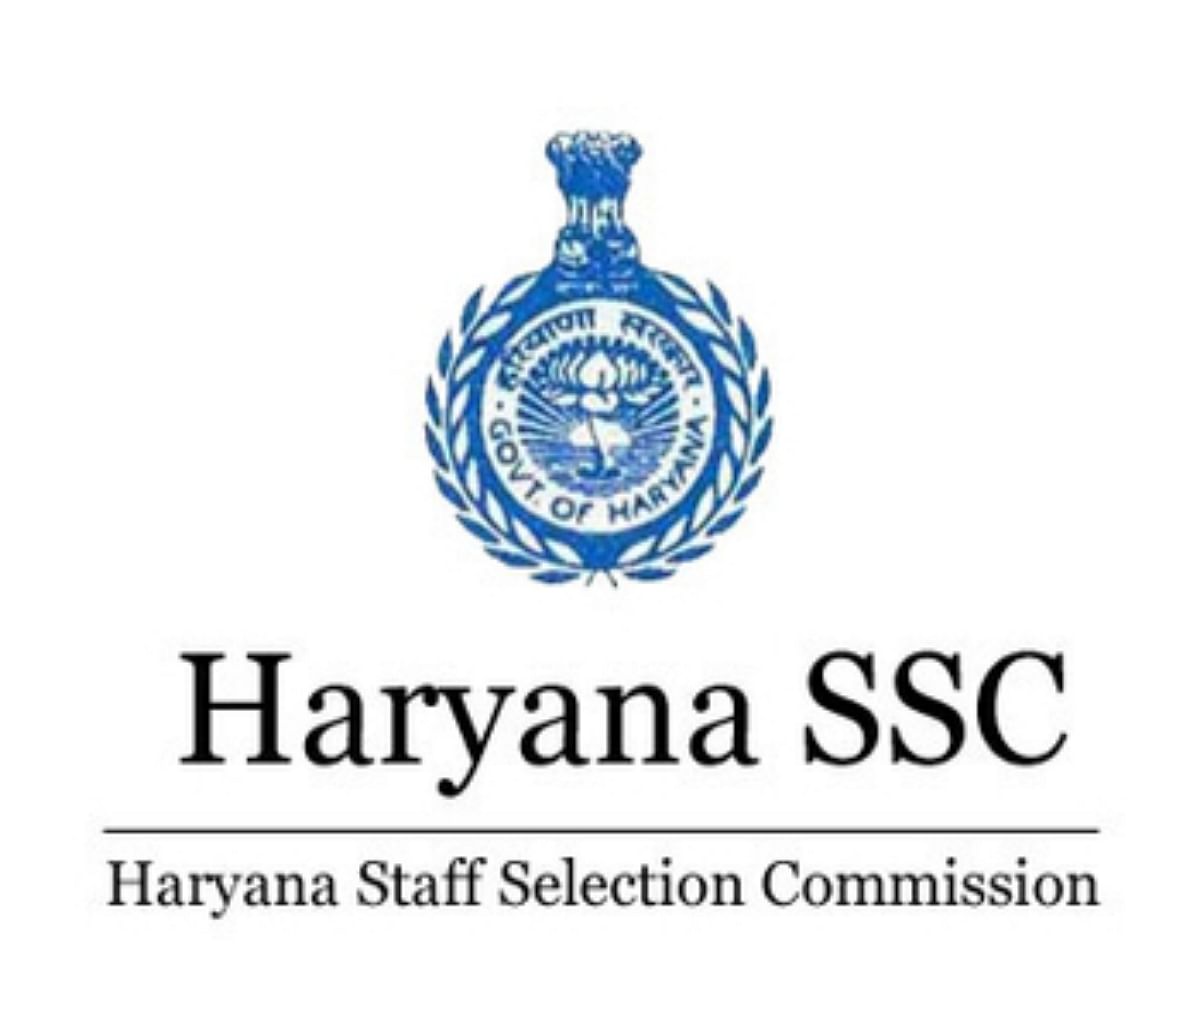 HSSC LDC, Jr. Accountant 2978 Posts Admit Card Released, Download Here